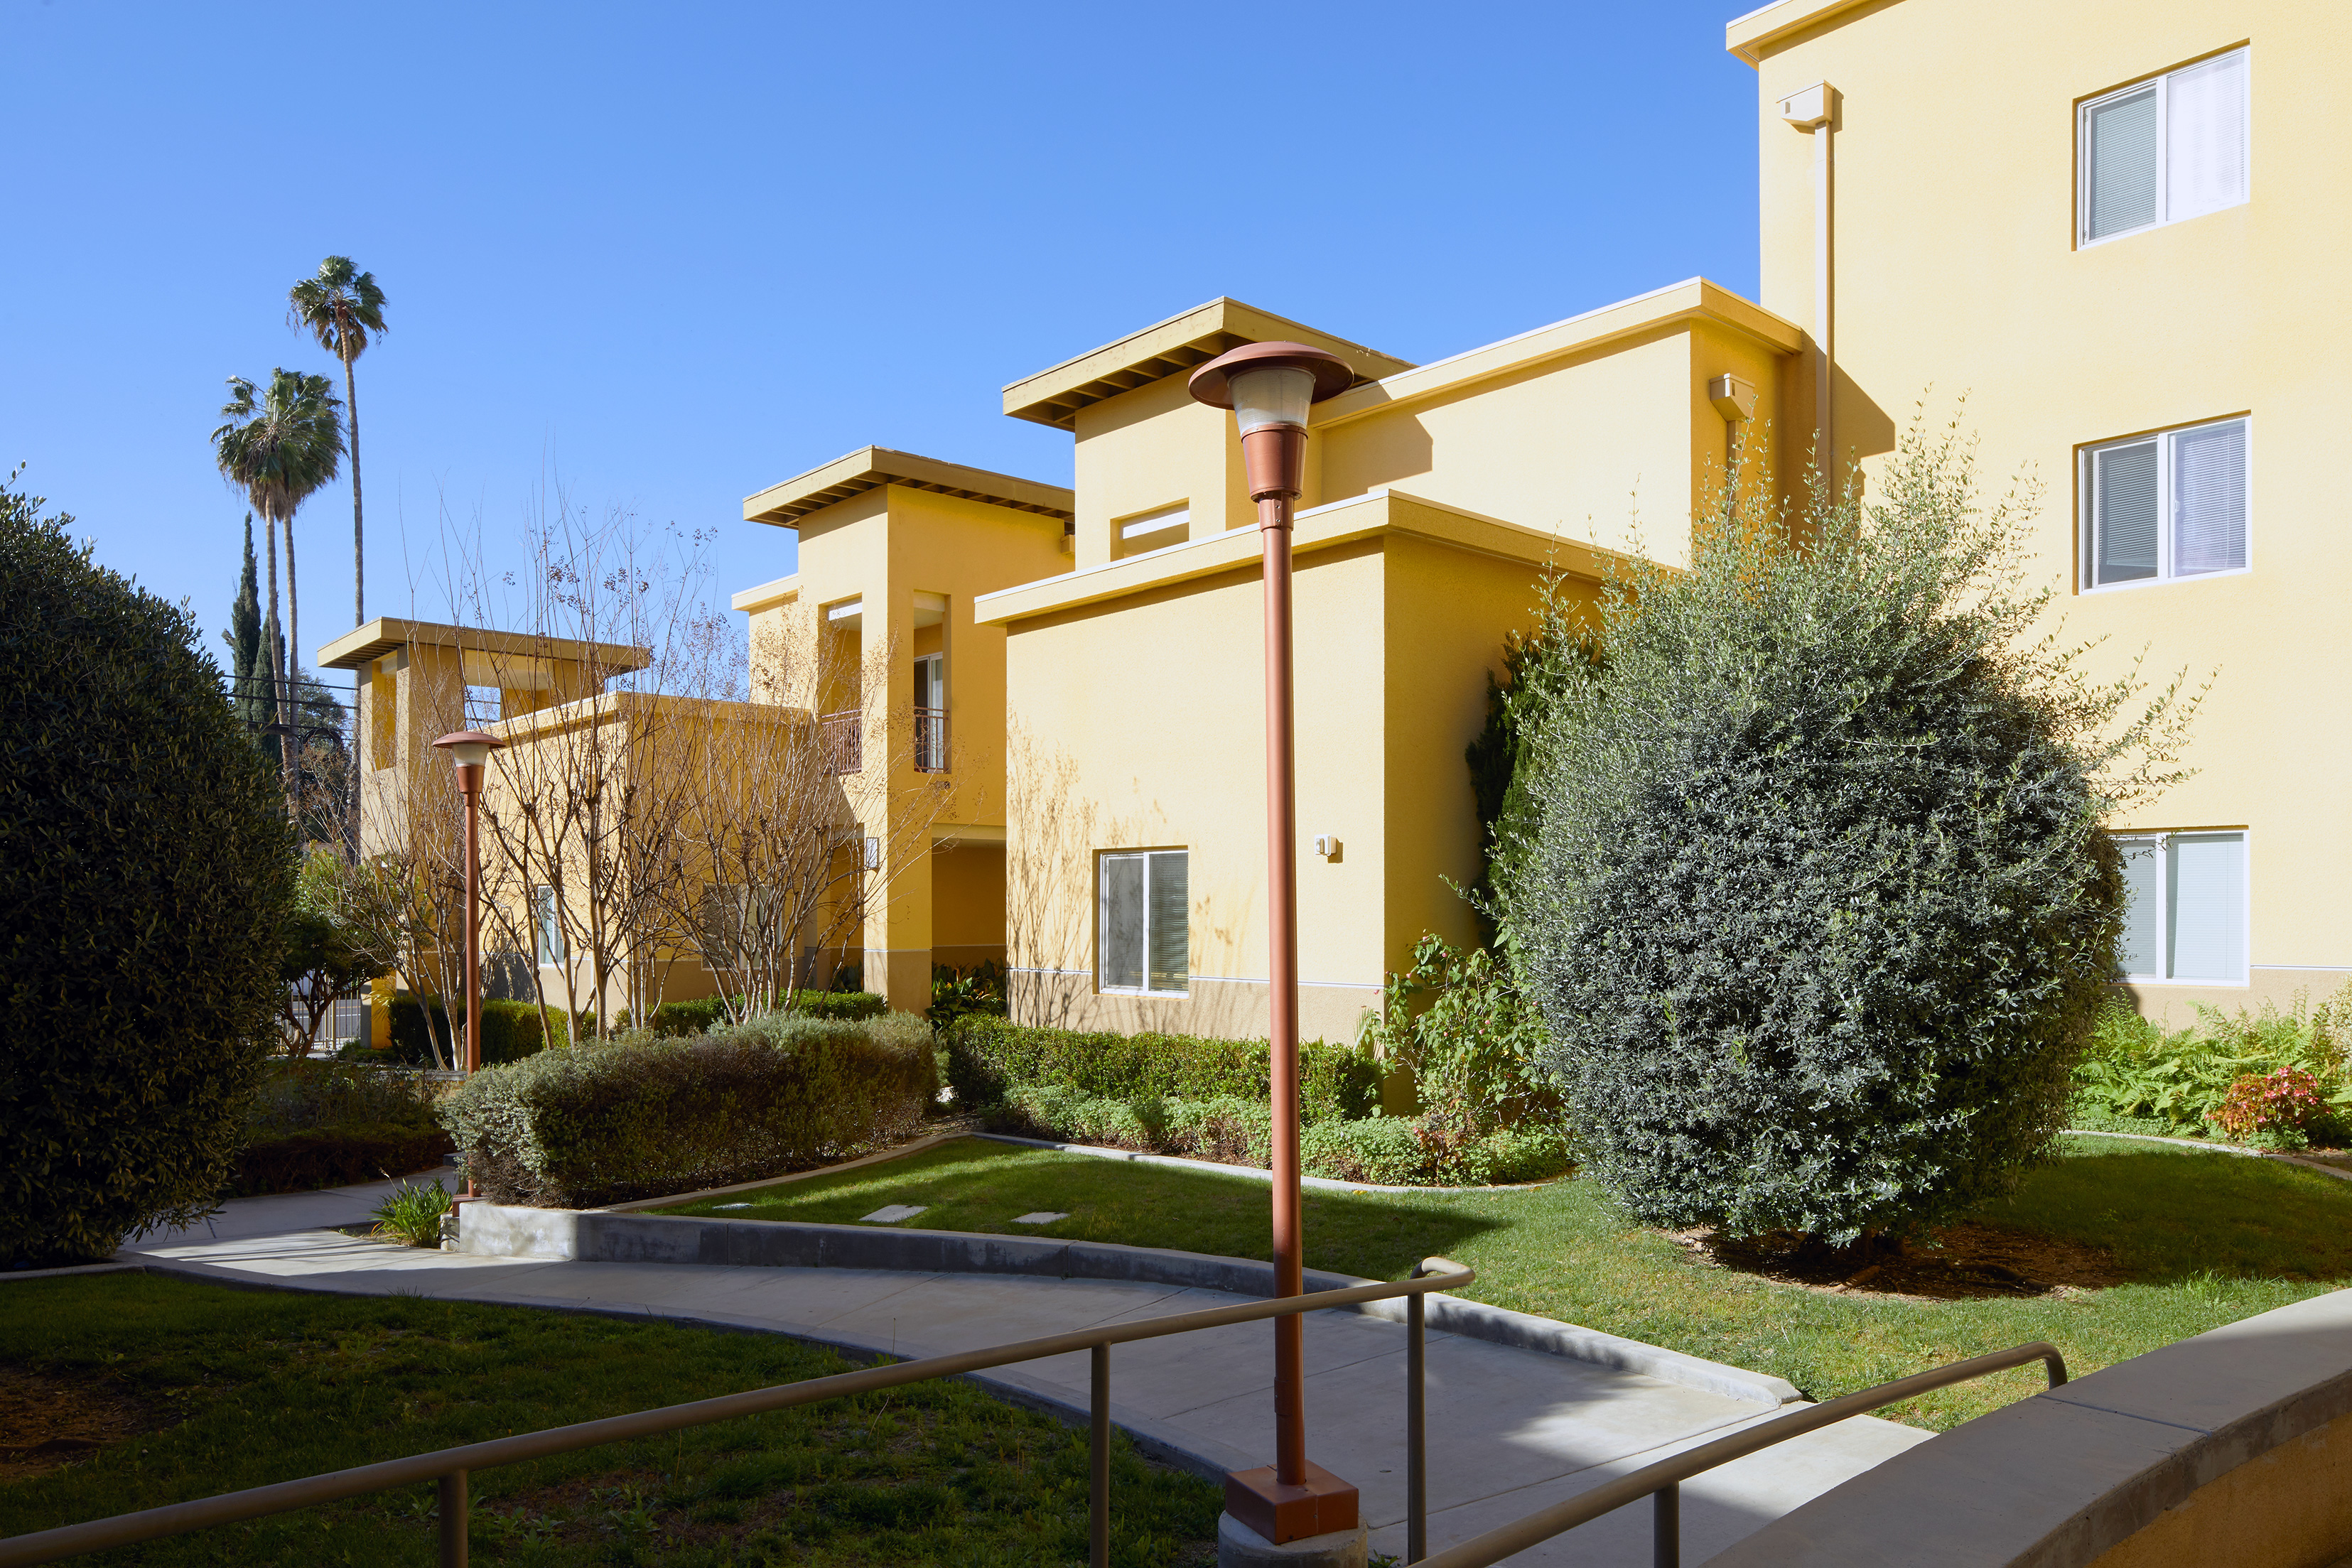 Exterior view of a courtyard at Parthenia Street Senior Housing showing landscaping bordering a walkway